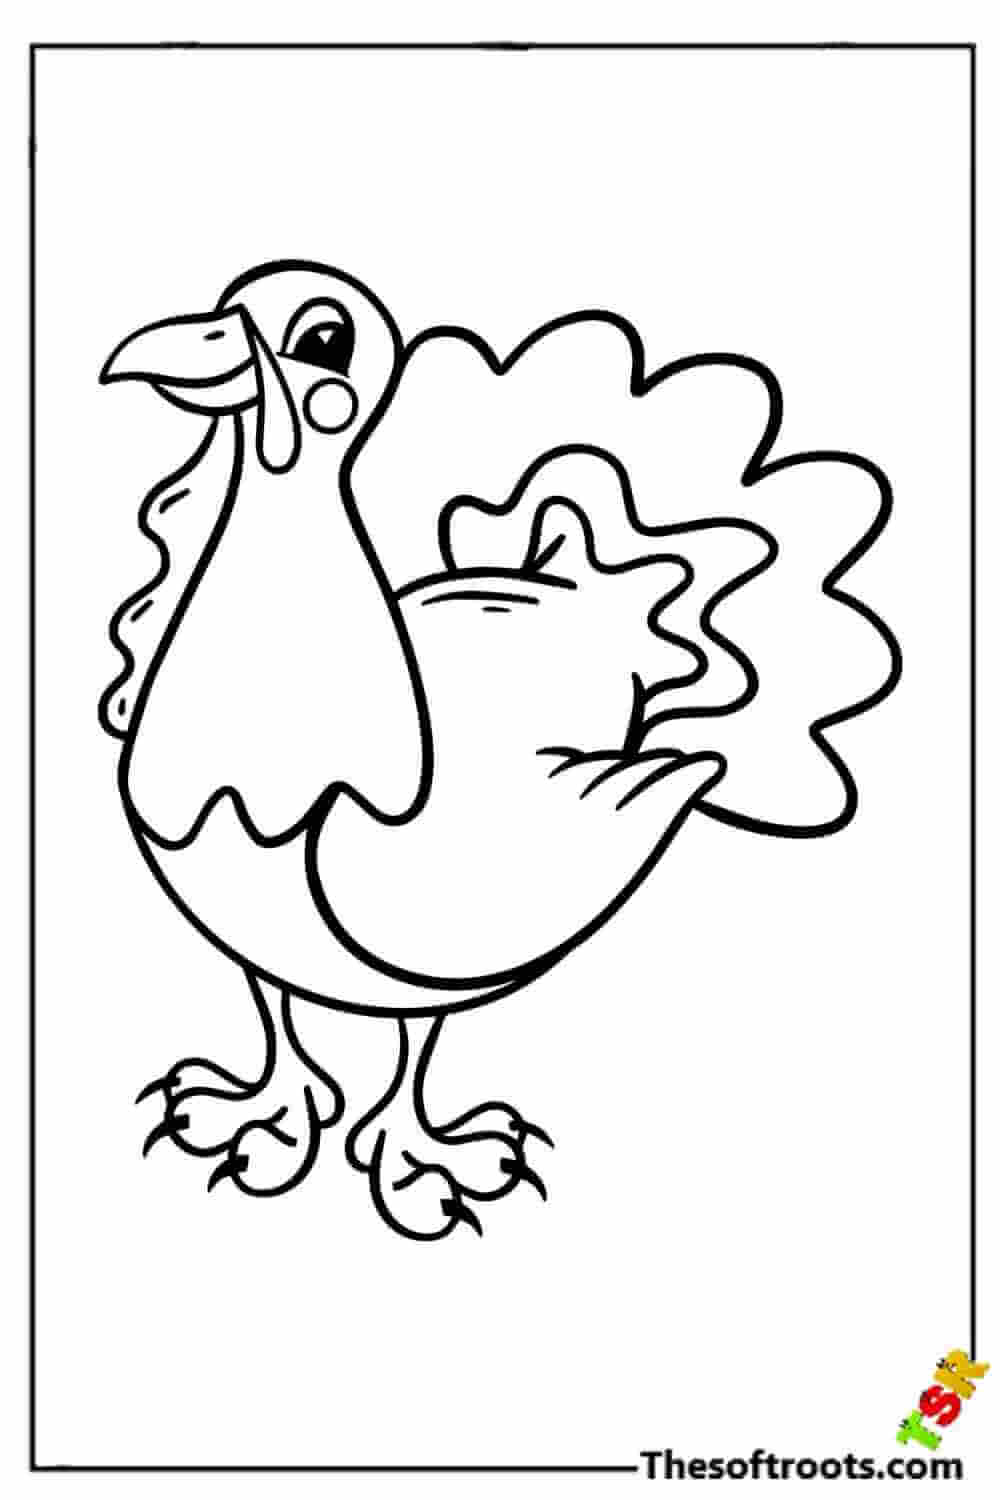 Turkey outline coloring pages